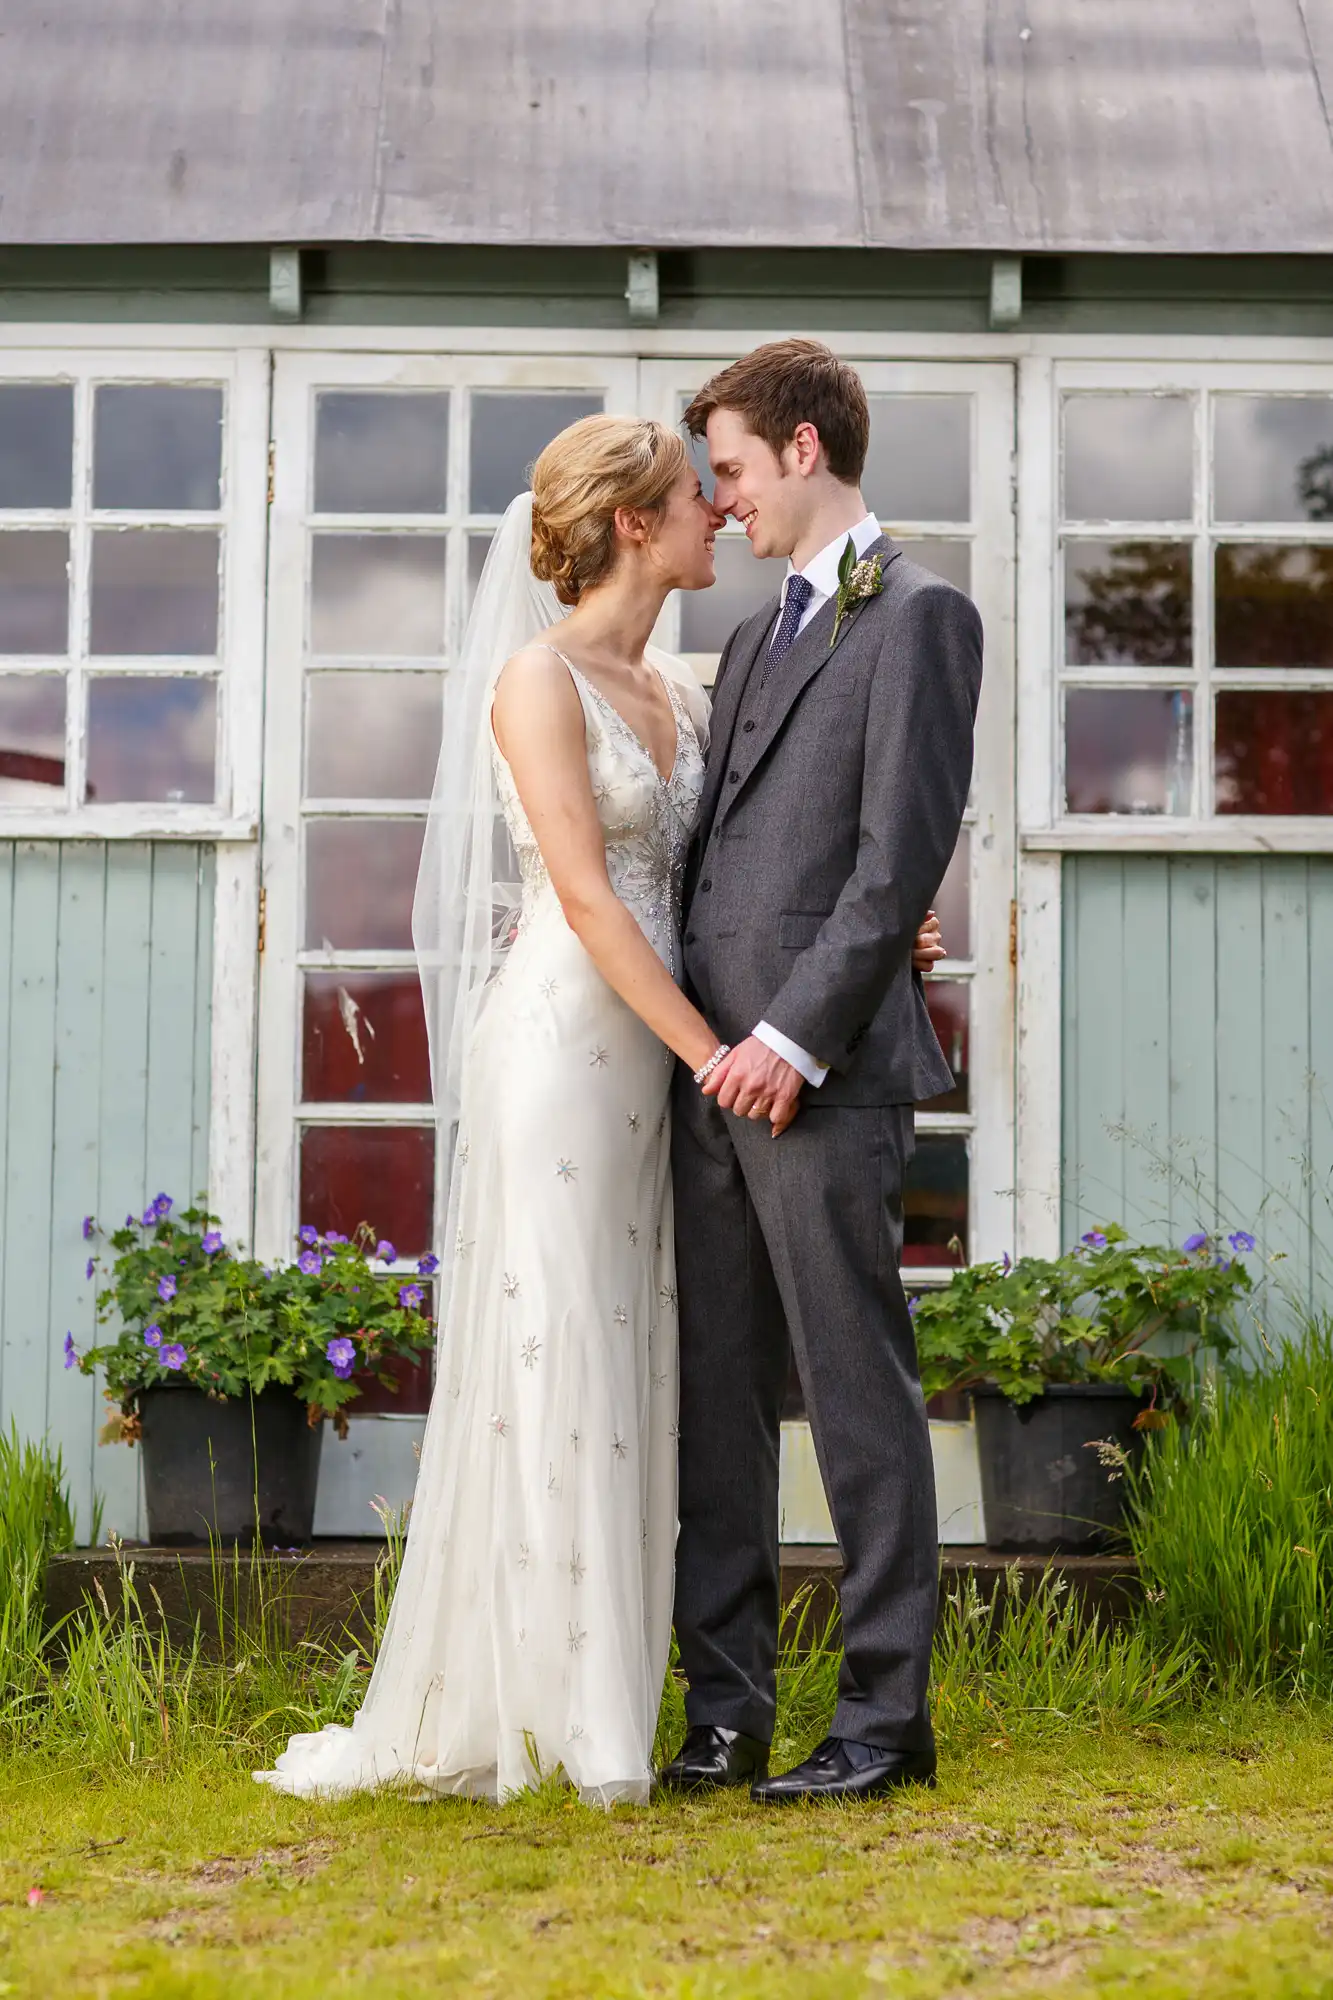 A bride and groom holding hands and touching foreheads gently in front of a rustic building with large windows and surrounded by greenery.